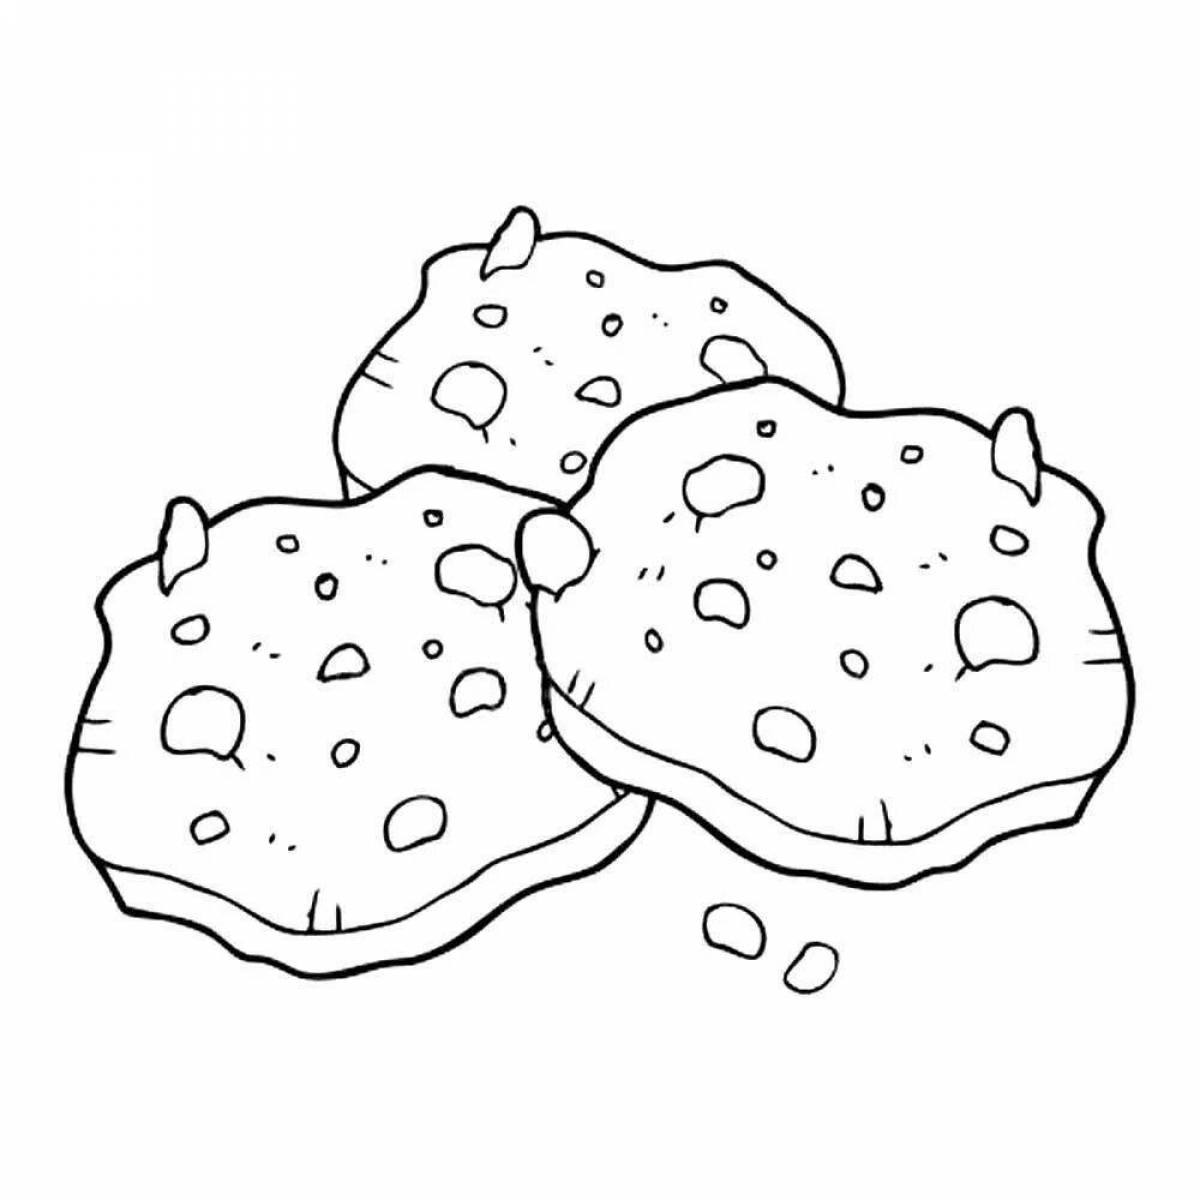 Cute cookie coloring page for kids